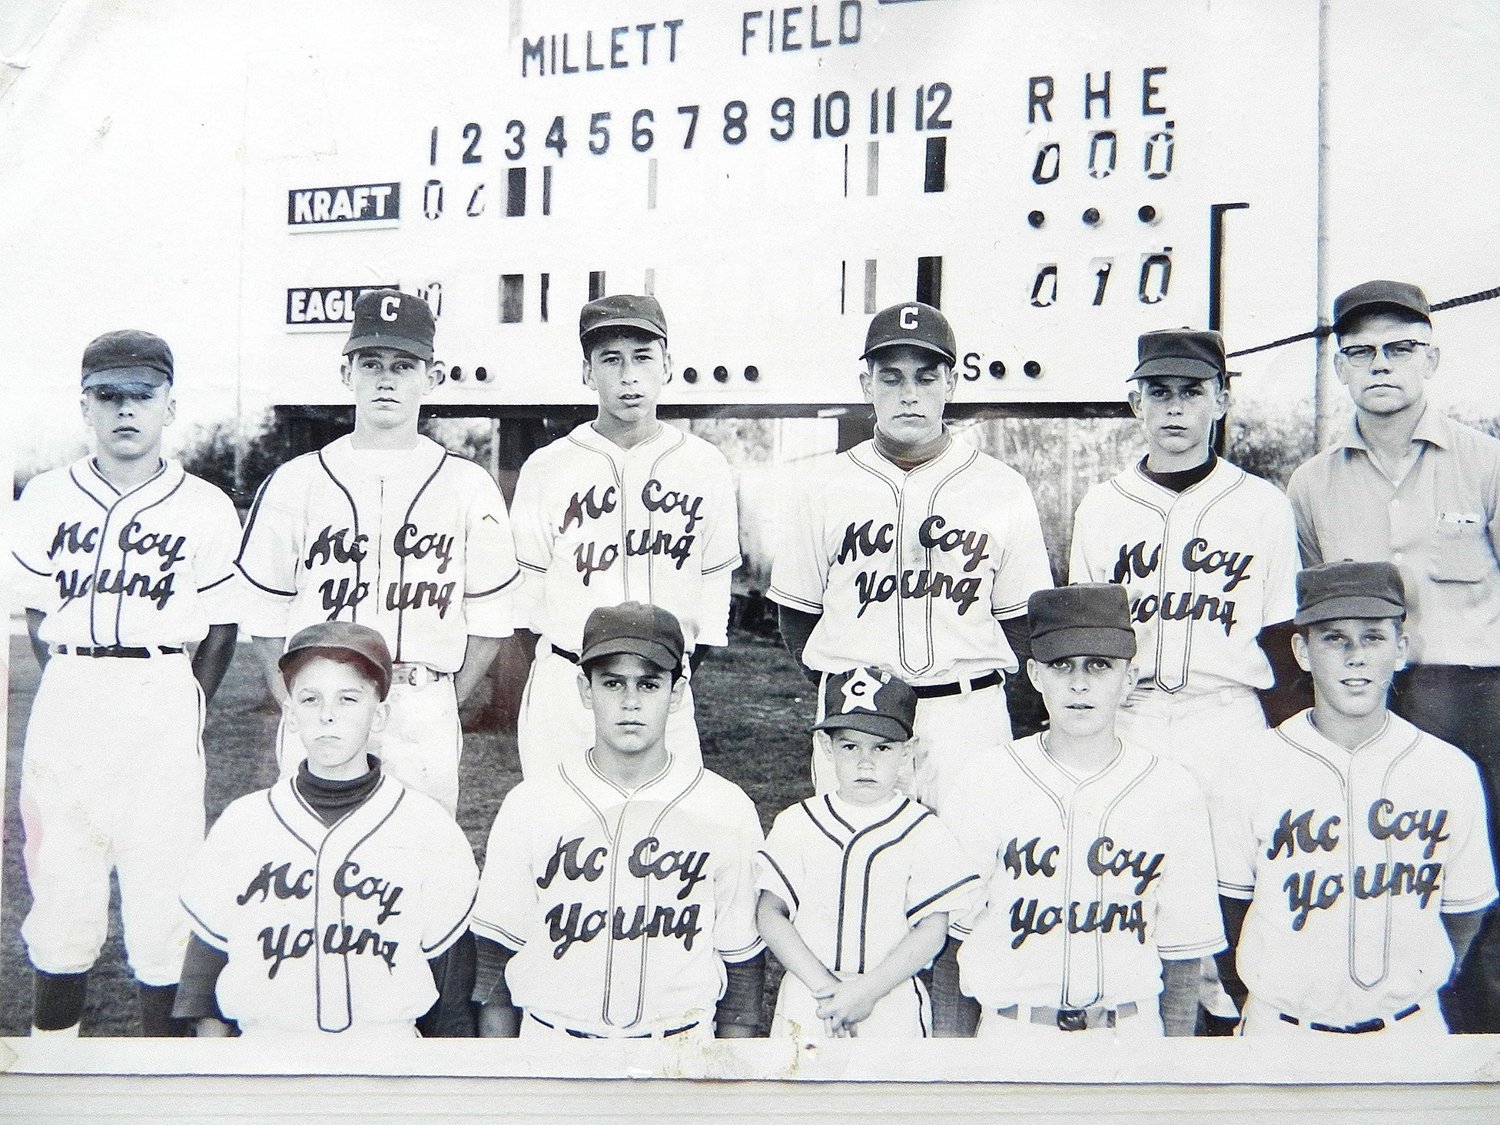 Millett Field scoreboard is visible in the background of this youth baseball team photo.